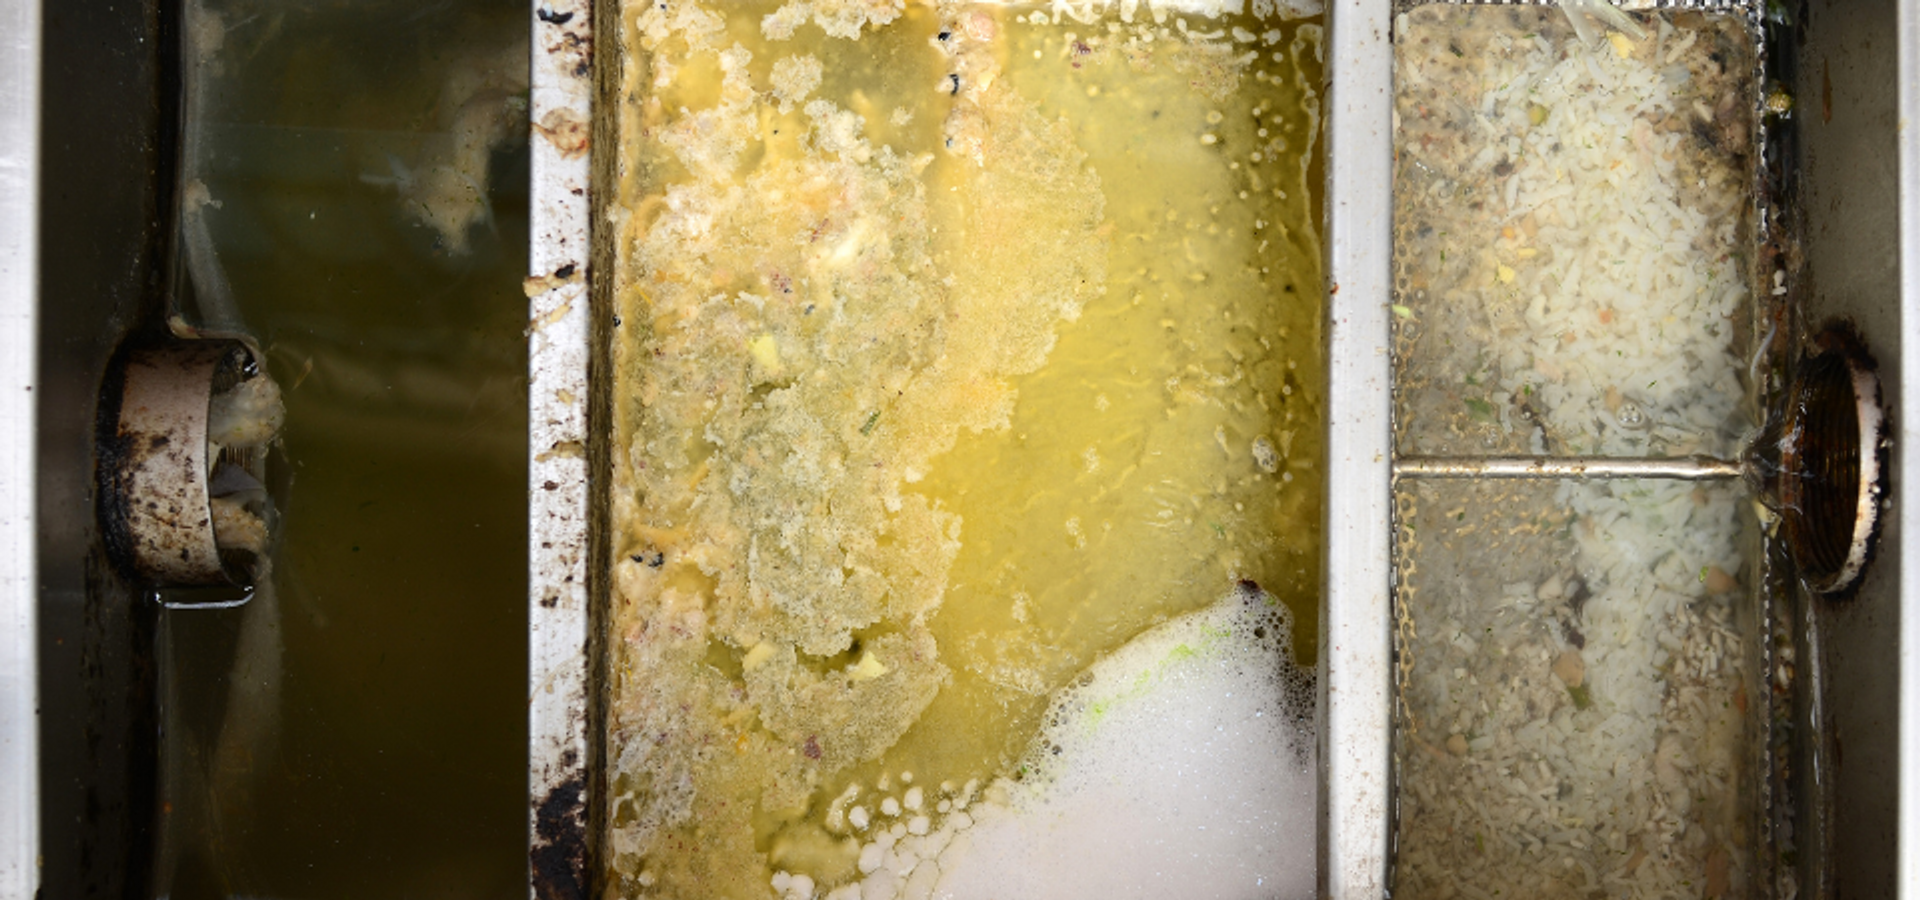 Treated Versus Untreated Grease Traps